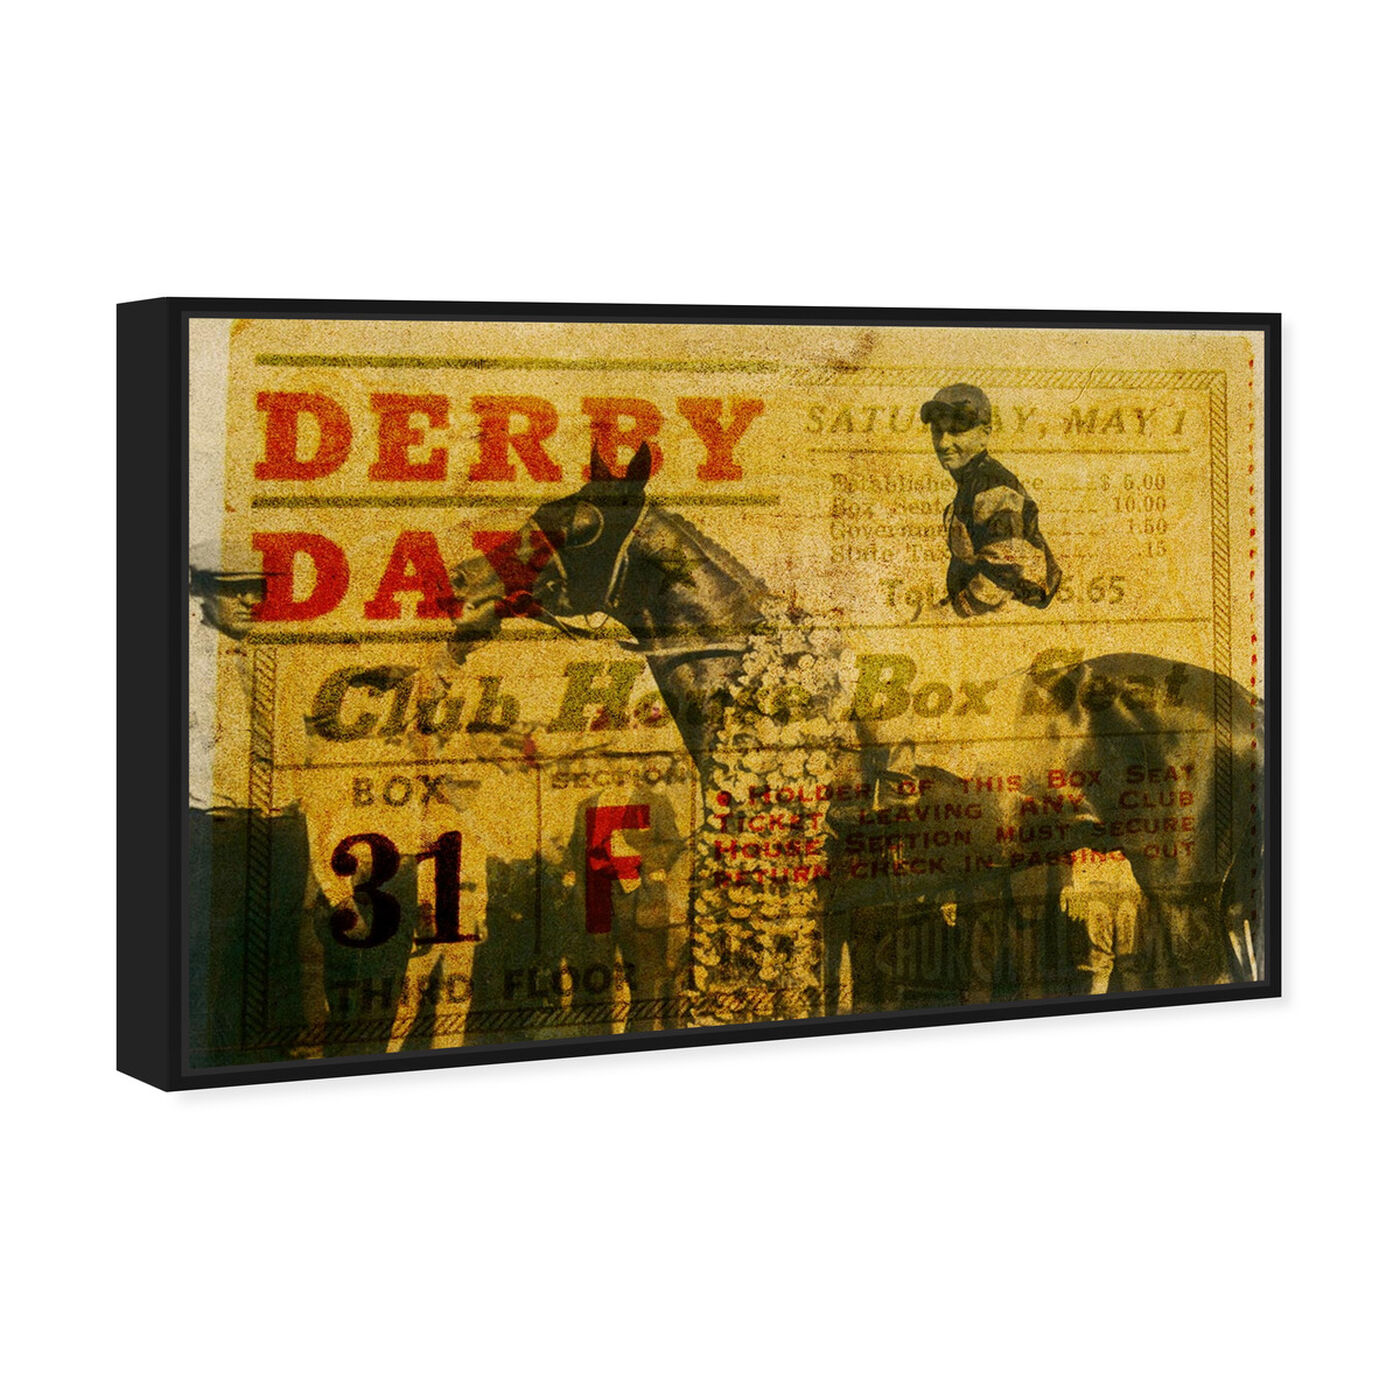 Angled view of Derby Day 1943 featuring advertising and posters art.